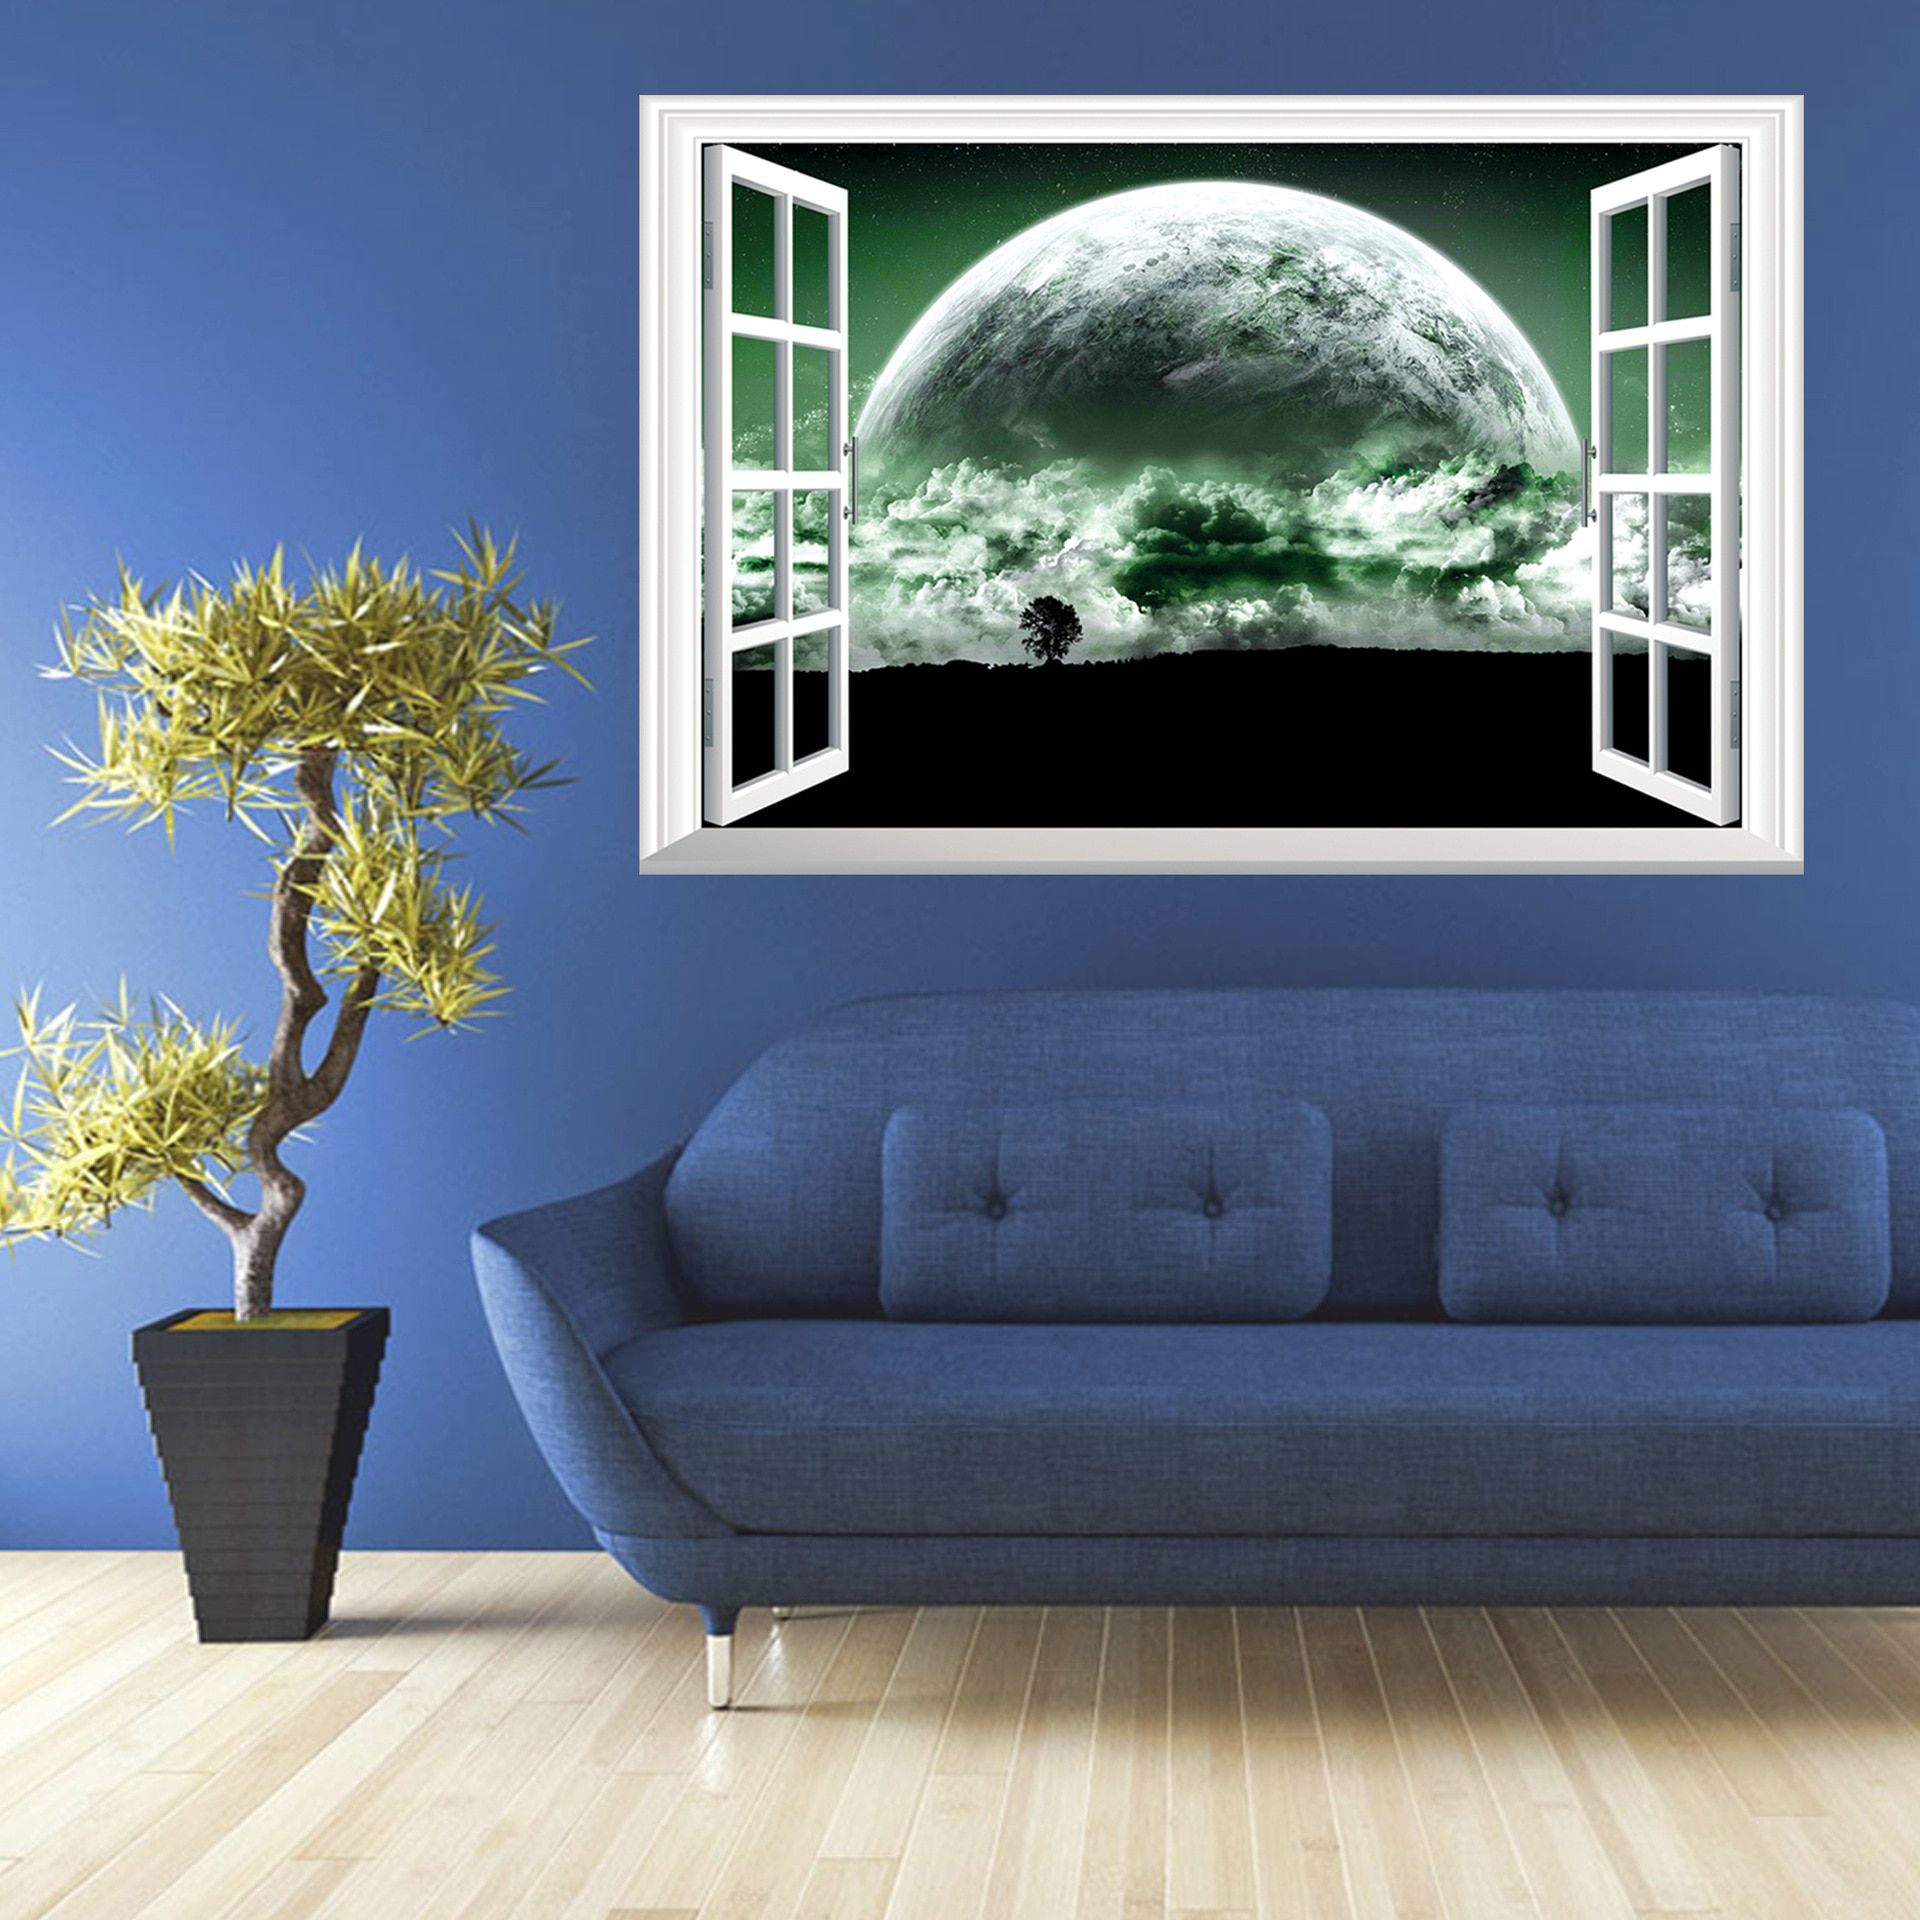 3d Galaxy Wall Sticker Outer Space Planet Stickers Pertaining To Most Recent Stripes Wall Art (View 4 of 20)